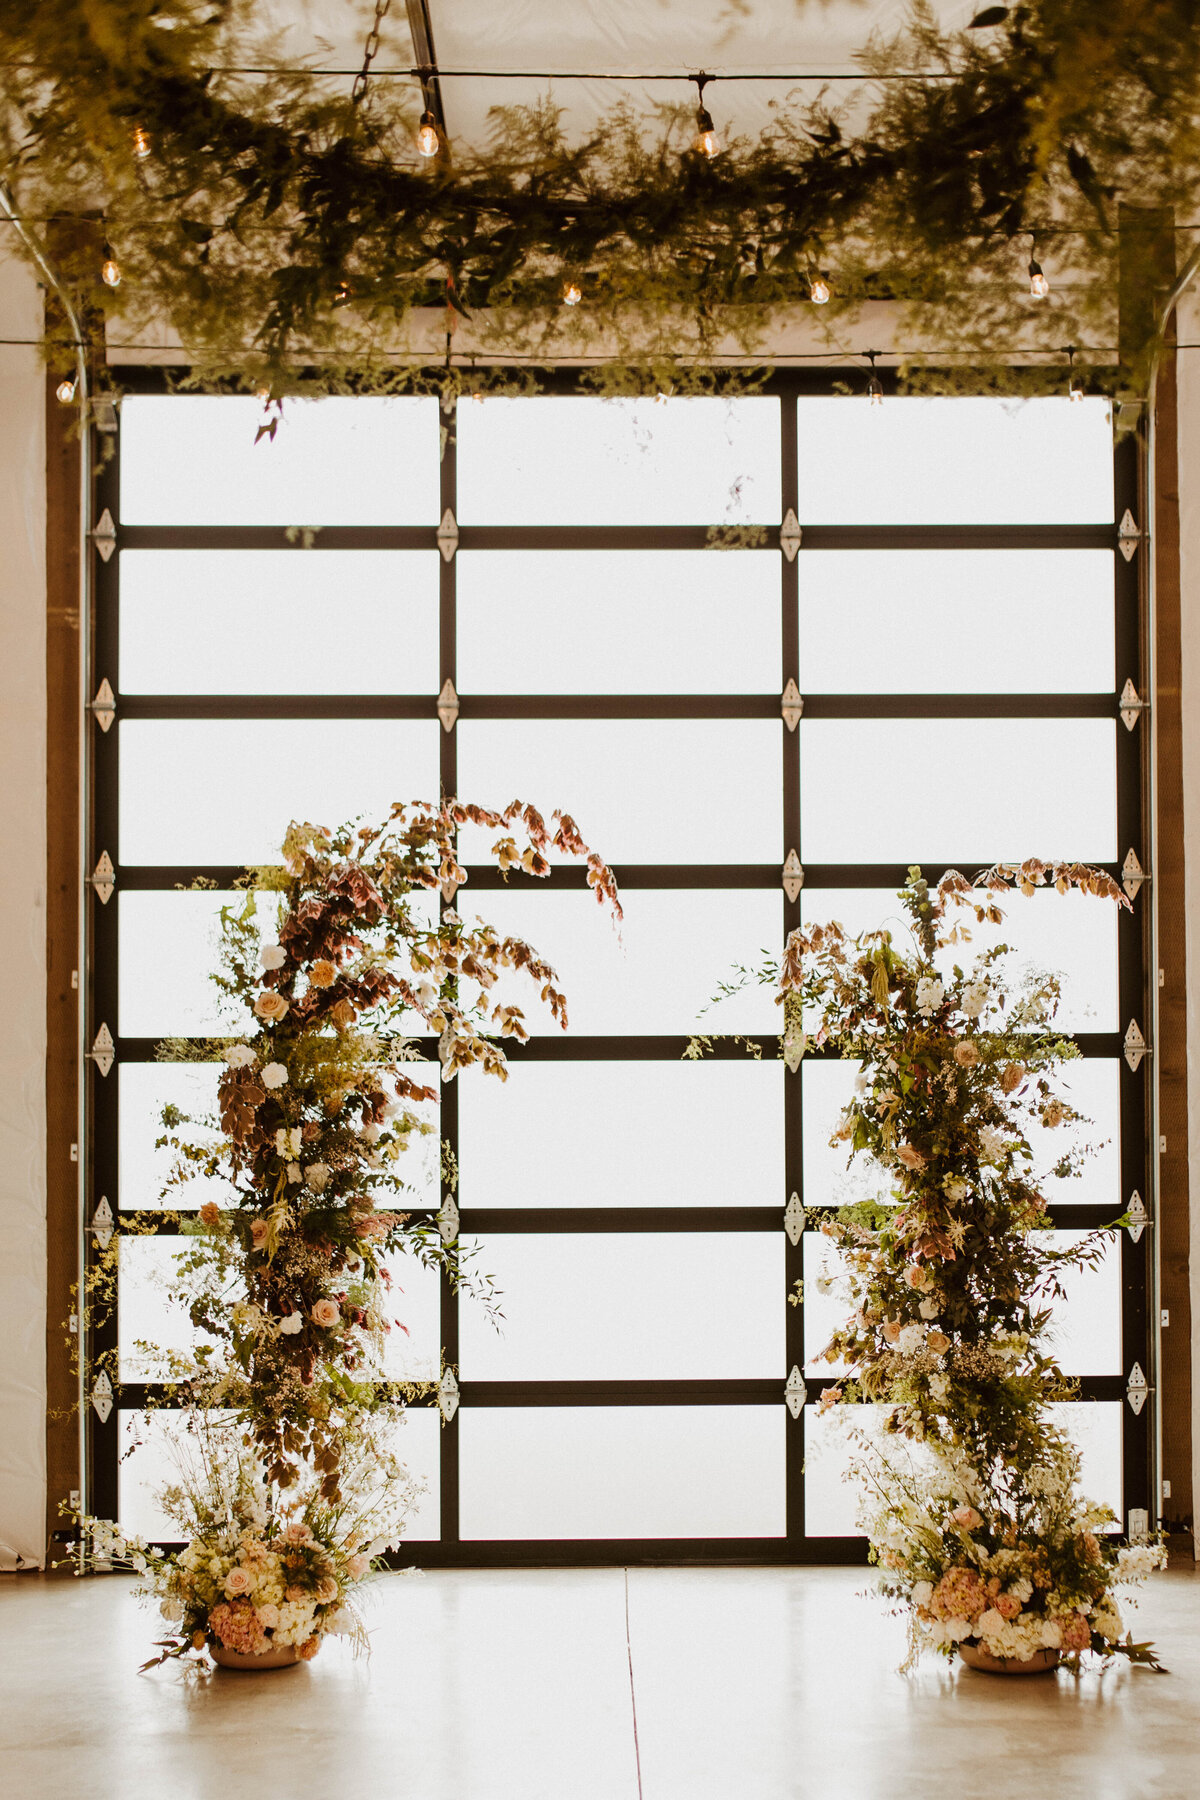 Picture of the glass barn doors, backlit and with a nice greenery altar.